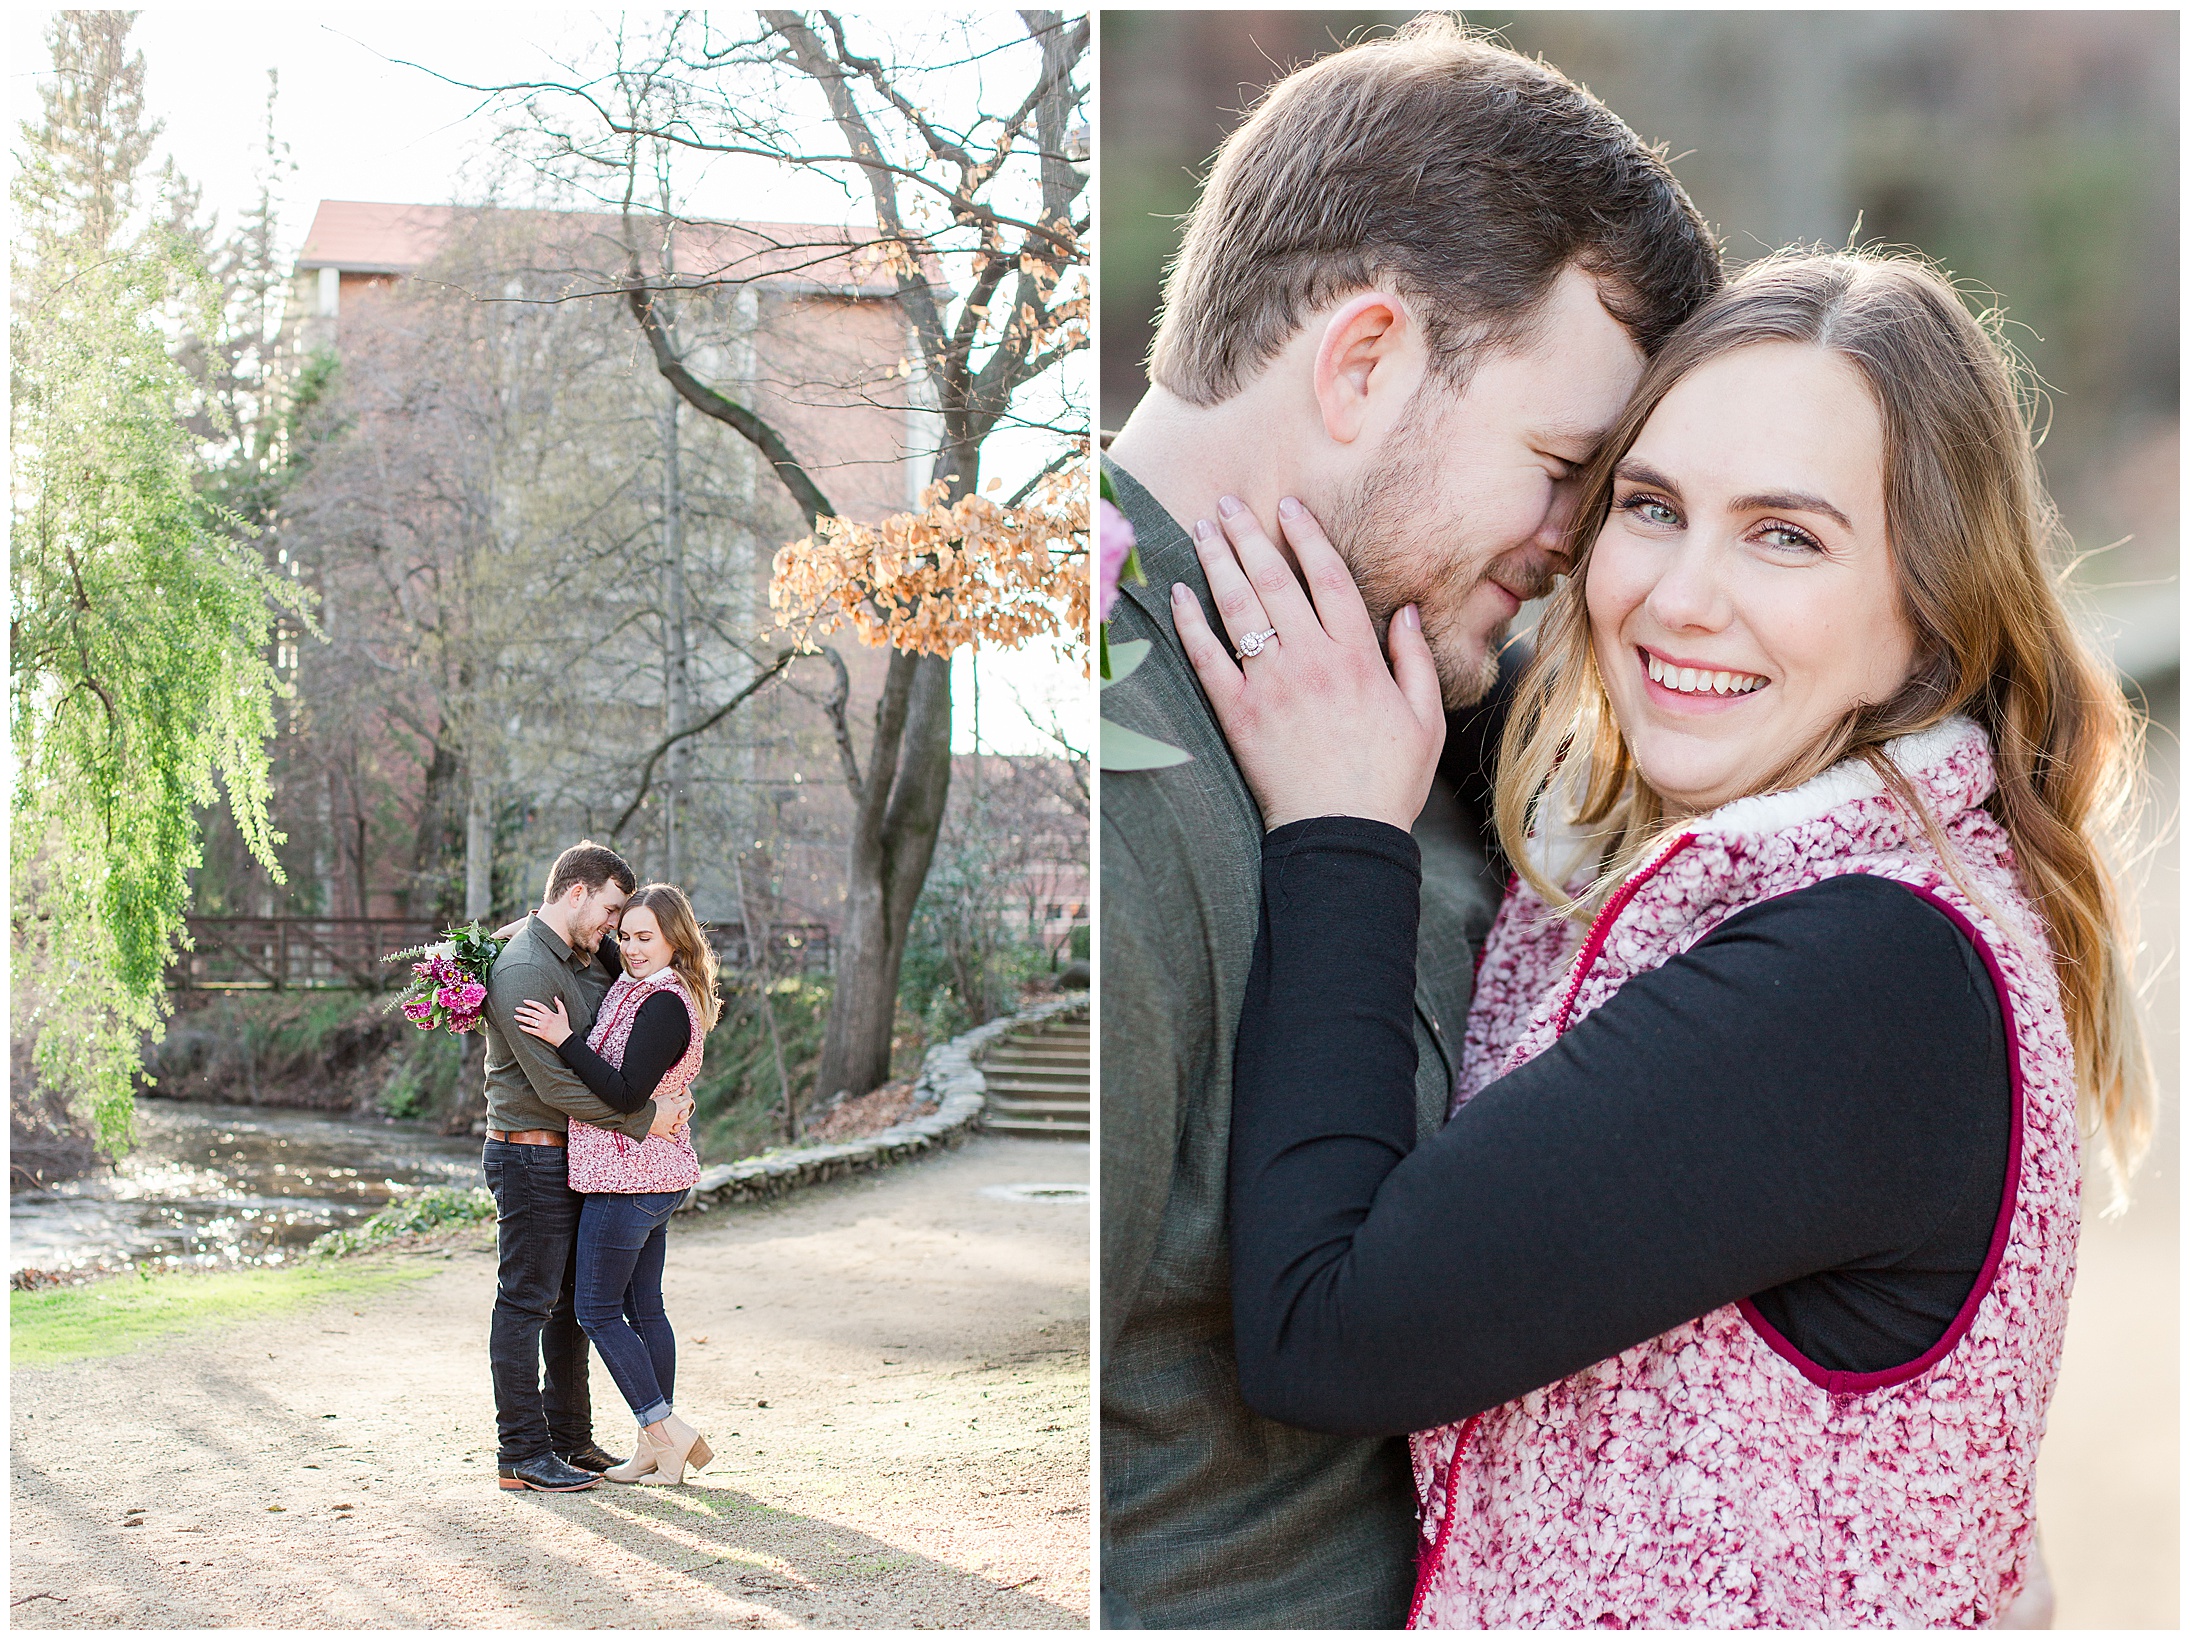 California State University Chico Winter Engagement Session Tulle Skirt Bouquet,